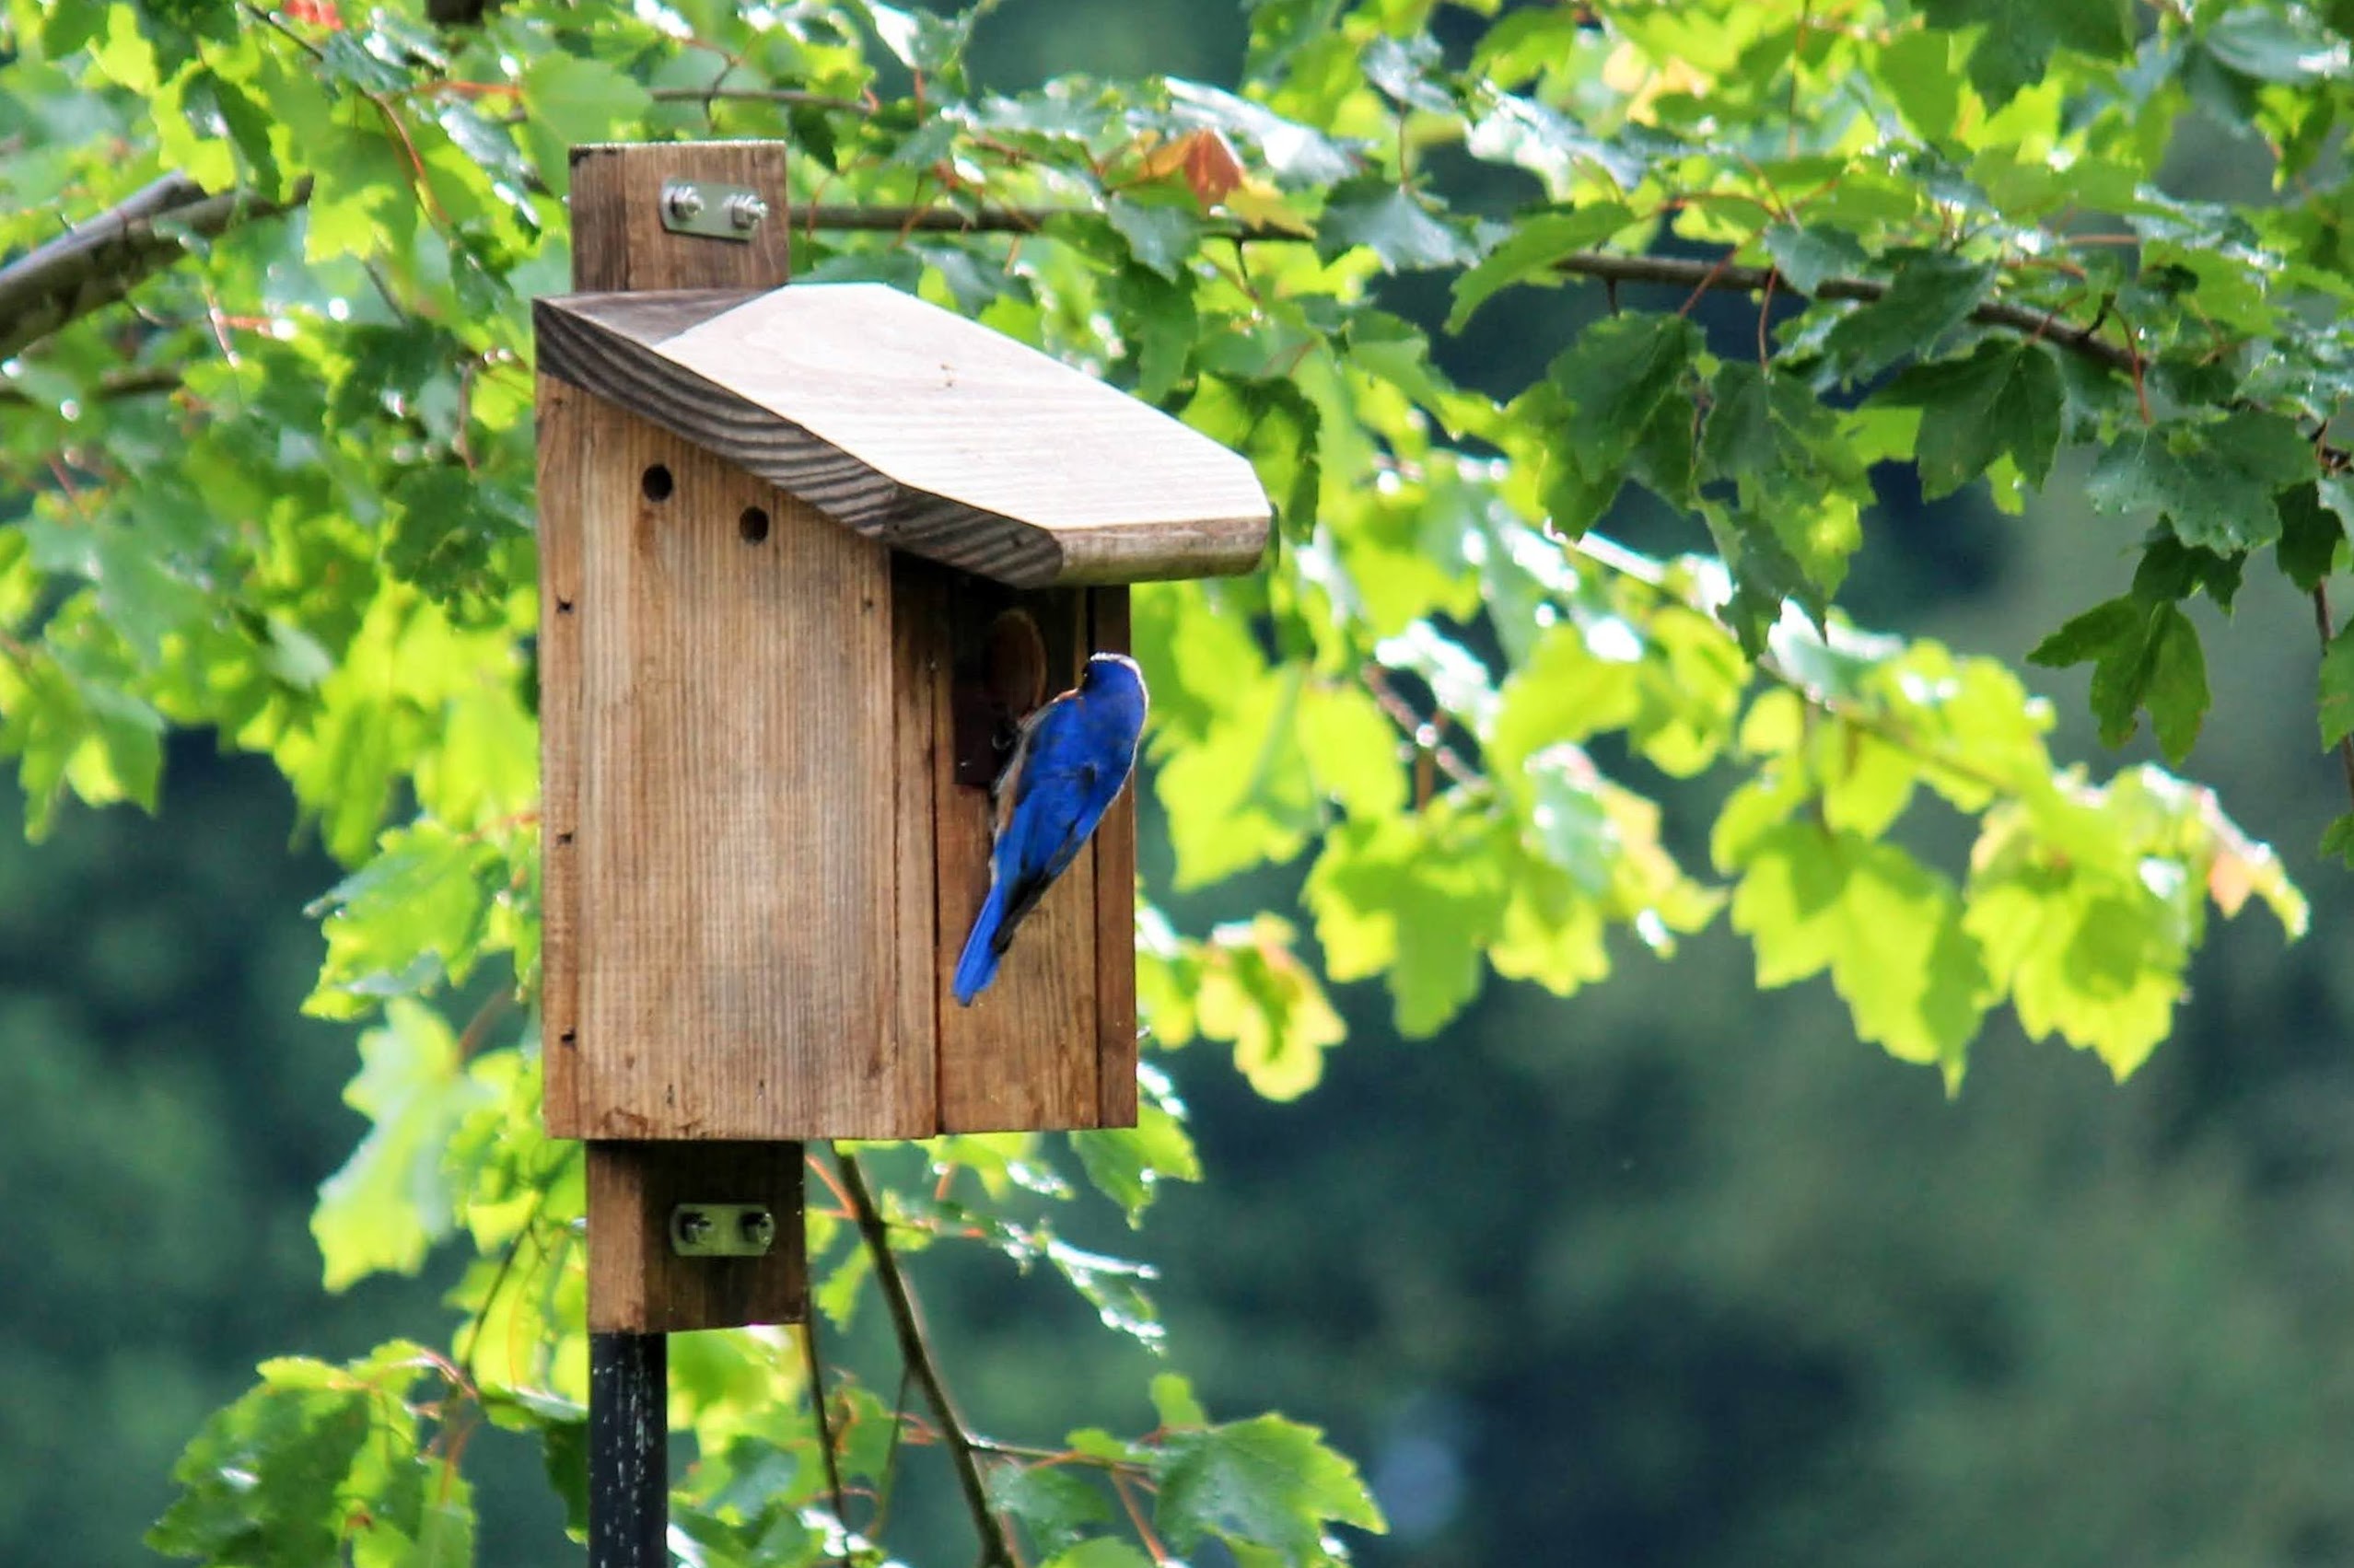 How To Build Nesting Boxes That Attract Bluebirds To Your Land